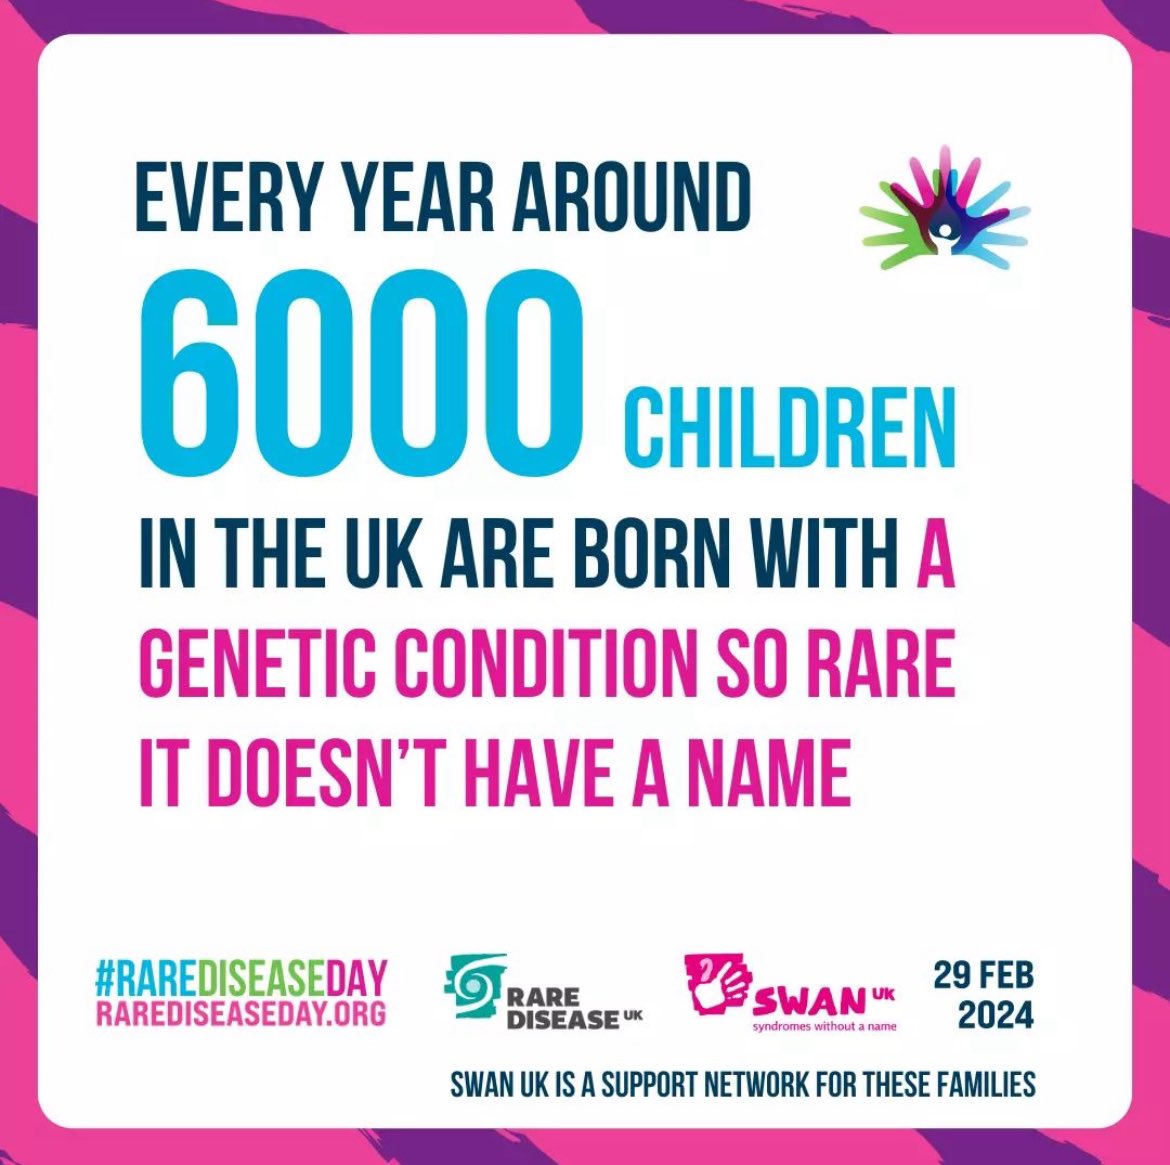 Today is the rarest day of the year plus it’s Rare Disease Day 🧬 @SWAN_UK support families affected by undiagnosed genetic conditions in the UK & they have supported our family for the past 11yrs. We love someone rare #Nellie 💕 @GeneticAll_UK #undiagnosed #RareDiseaseDay